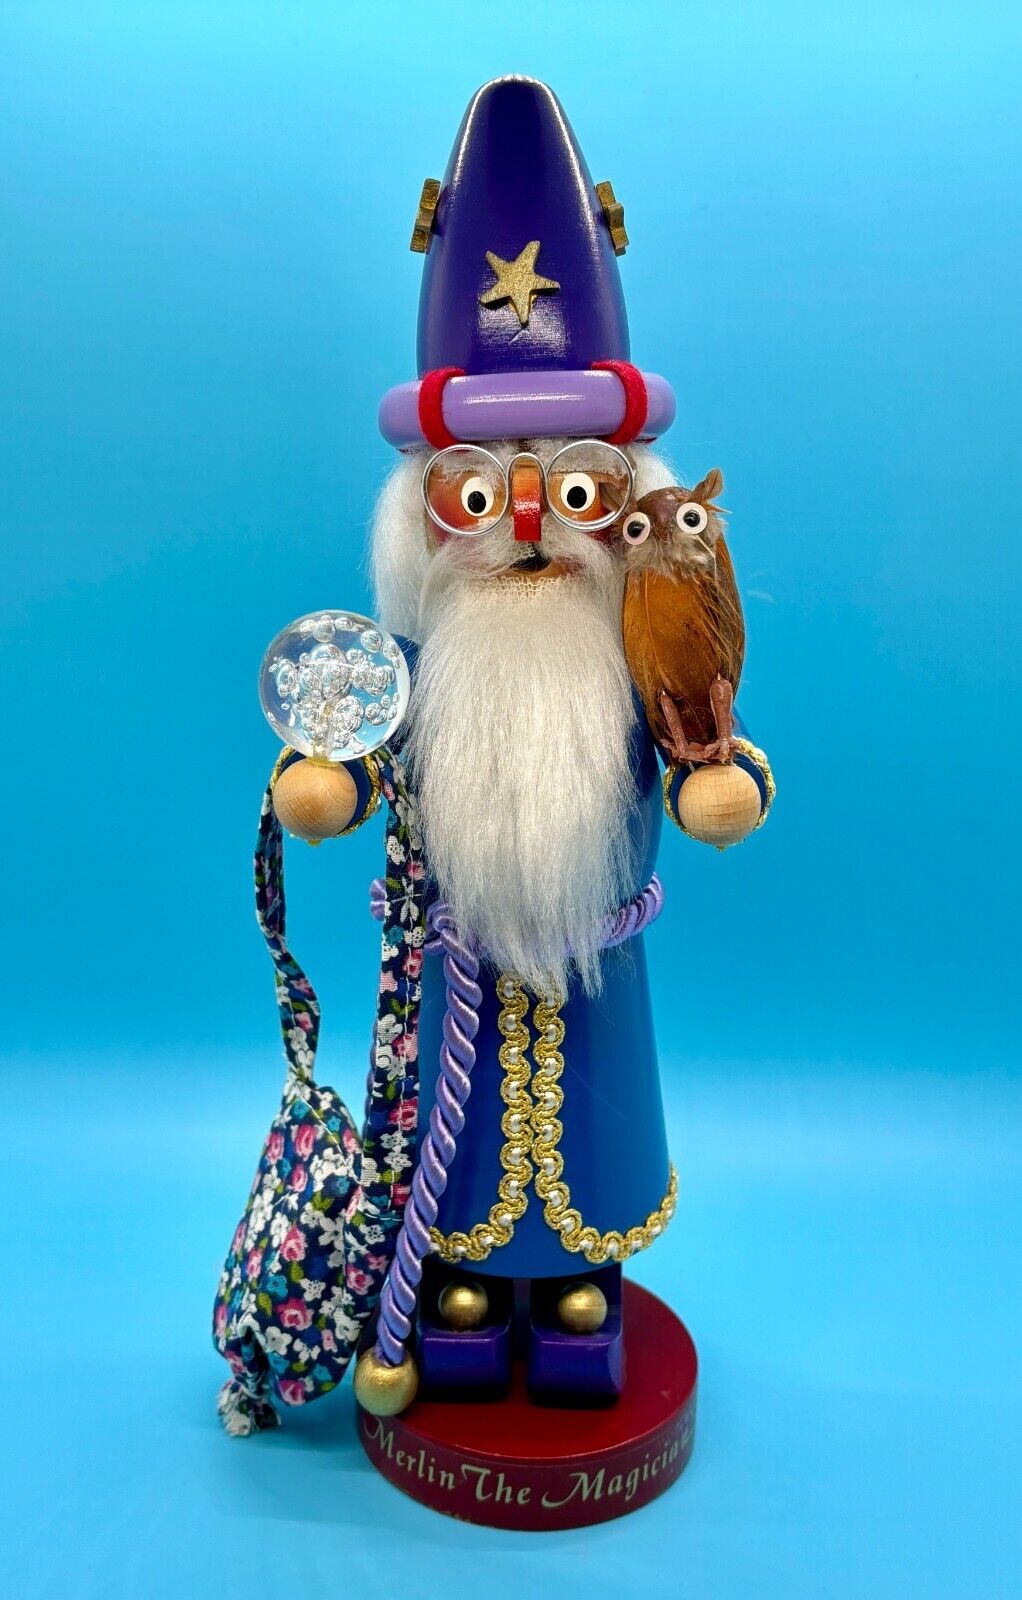 Steinbach “Merlin The Magician” Smoker 12” Limited Edition #04315/7500 See Desc